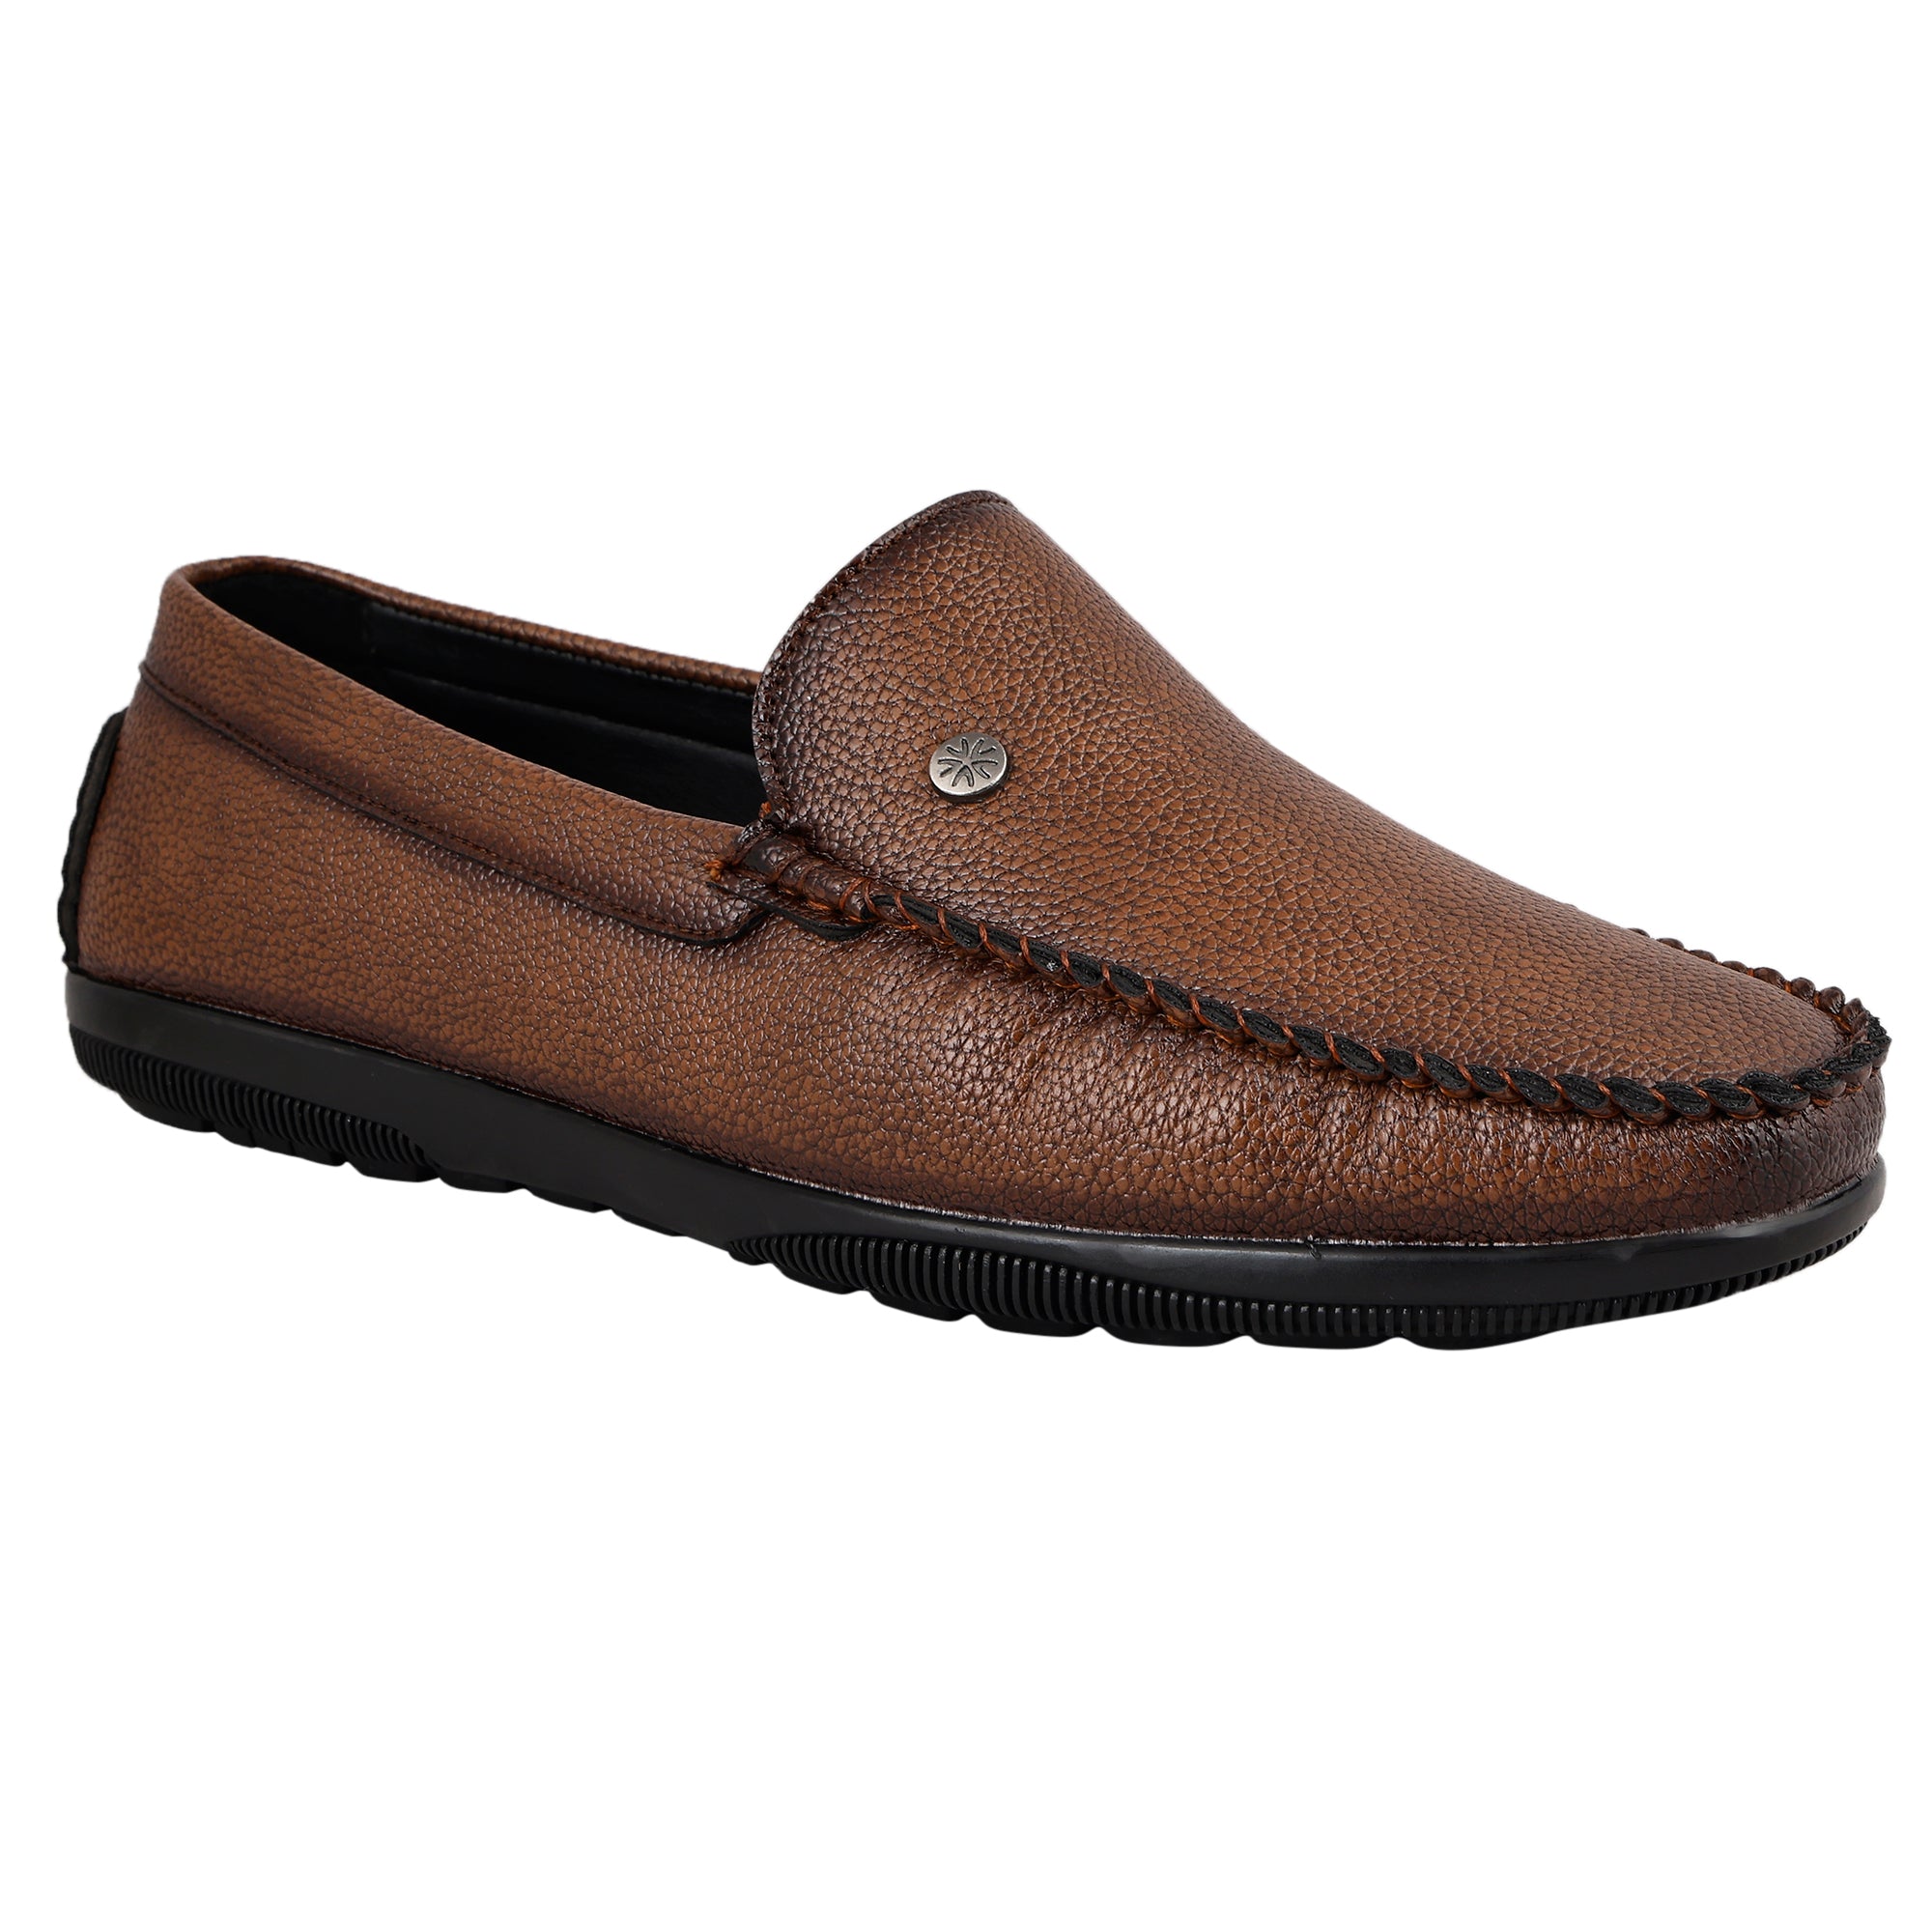 LB 45B Buckle Russet Tan Slip On Style Loafer Most Comfortable Doctor Insole With Wrinkle Free Fox Leather Loafers.